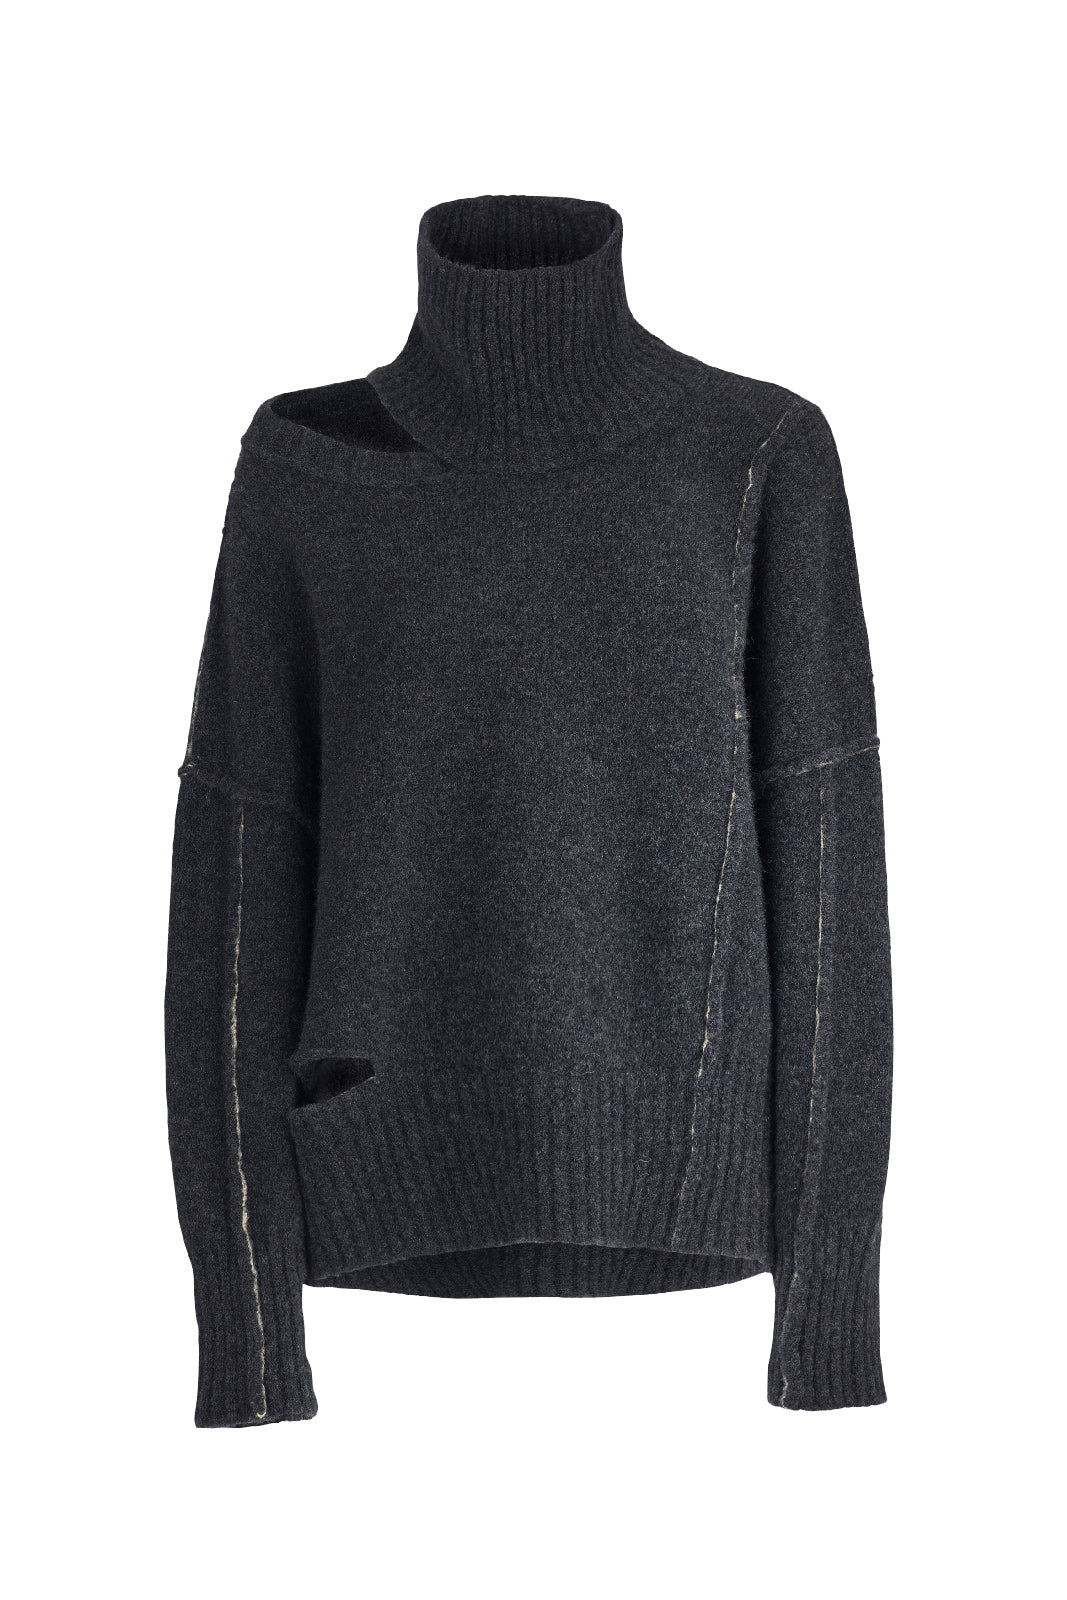 Isabel Benenato Highneck Yak Jumper with Cut-Out Details   Graphite/White